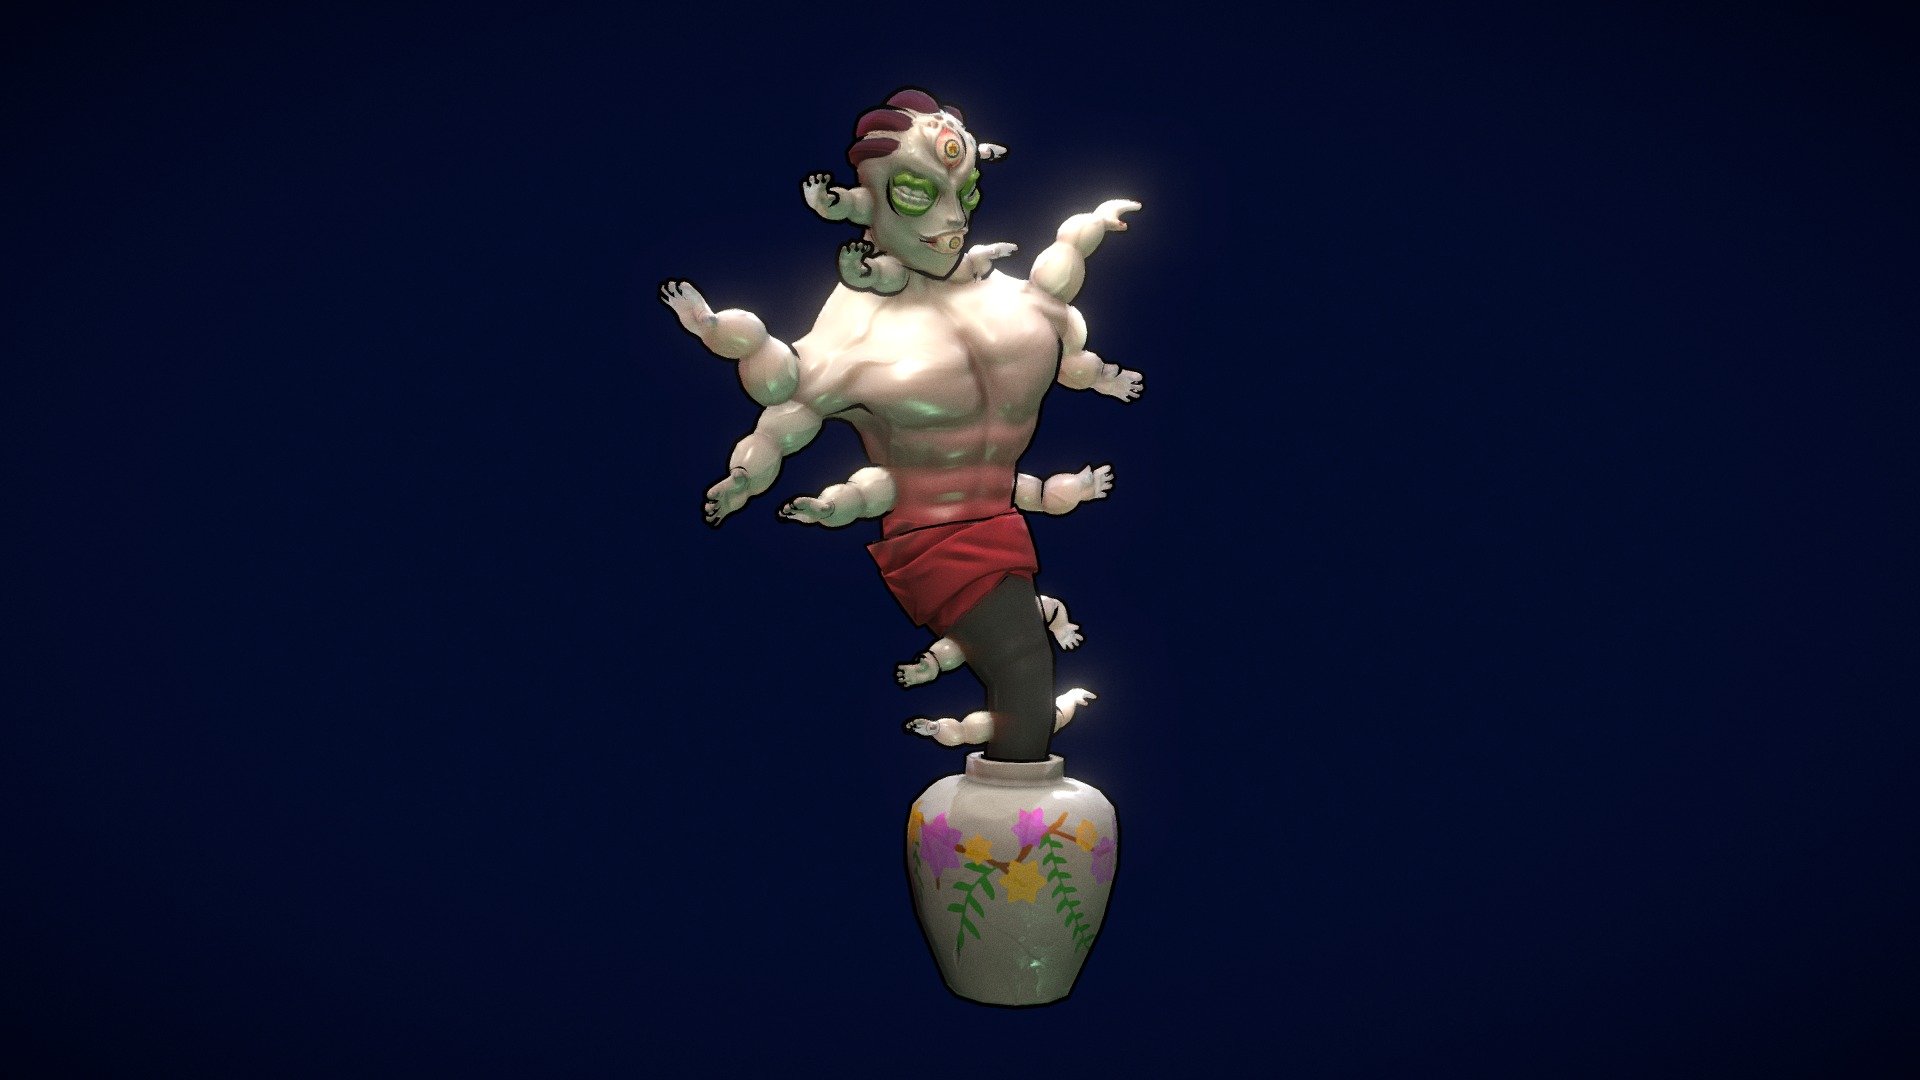 Hey, hey! This week is a national holiday in Turkey, so I decided to model a Gyokko character from the anime Demon Slayer. I really enjoyed my modeling flow in sculpting, retopology, and texturing. Also, I think I did a good job on rigging. However, I feel like I did a little bit of rushed work on the animation. I could have done much better, but I have lots of modeling plans for this holiday, so I didn't want to spend too much time on a single model. In the end, I am really happy with the model =) - Gyokko from Demon Slayer - Download Free 3D model by Batuhan13 3d model